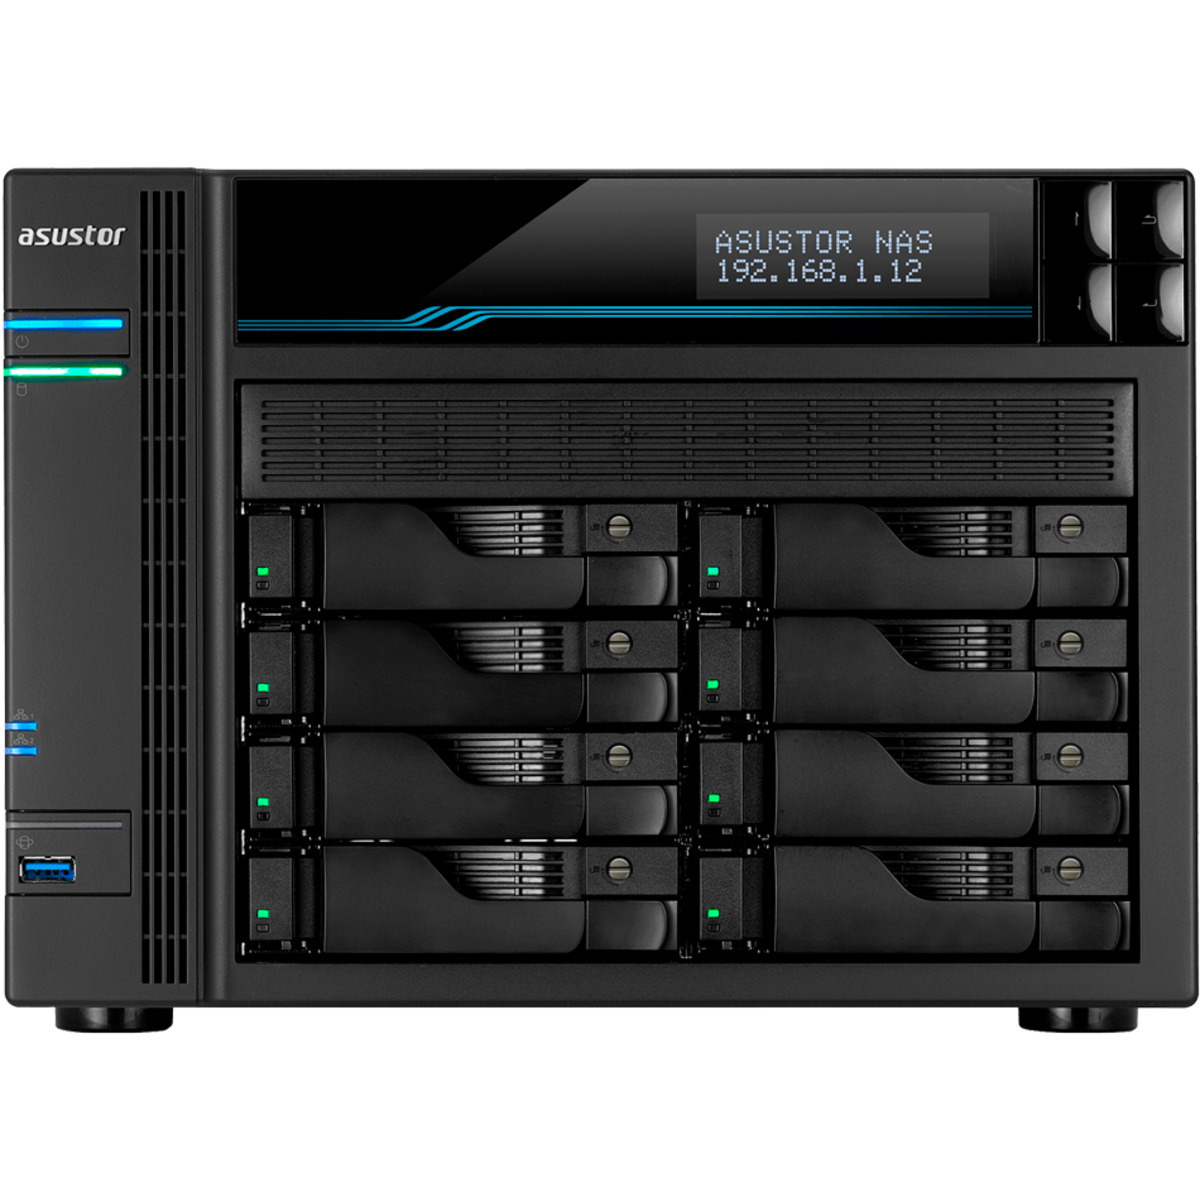 ASUSTOR AS6508T Lockerstor 8 154tb 8-Bay Desktop Multimedia / Power User / Business NAS - Network Attached Storage Device 7x22tb Western Digital Ultrastar HC570 WUH722222ALE6L4 3.5 7200rpm SATA 6Gb/s HDD ENTERPRISE Class Drives Installed - Burn-In Tested - ON SALE - FREE RAM UPGRADE AS6508T Lockerstor 8